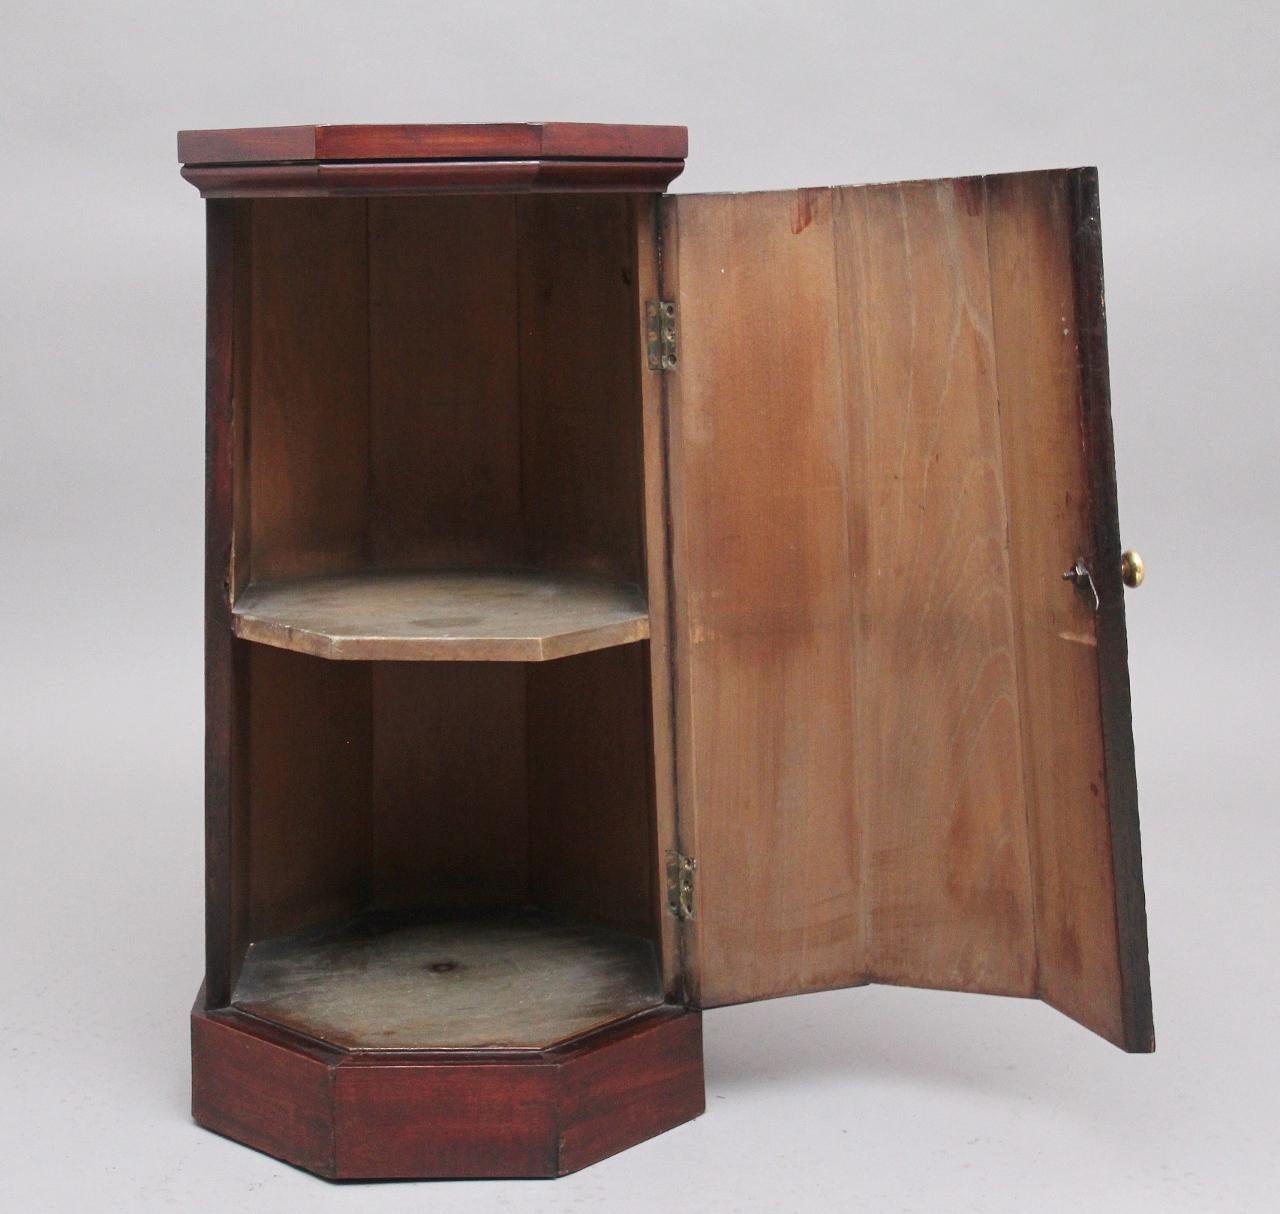 19th Century octagon shaped mahogany pedestal / cupboard, the octagonal shaped top above the tapered pedestal base with a hinged cupboard door opening to reveal a single fixed shelf inside, the door having a lockable turned brass handle, supported